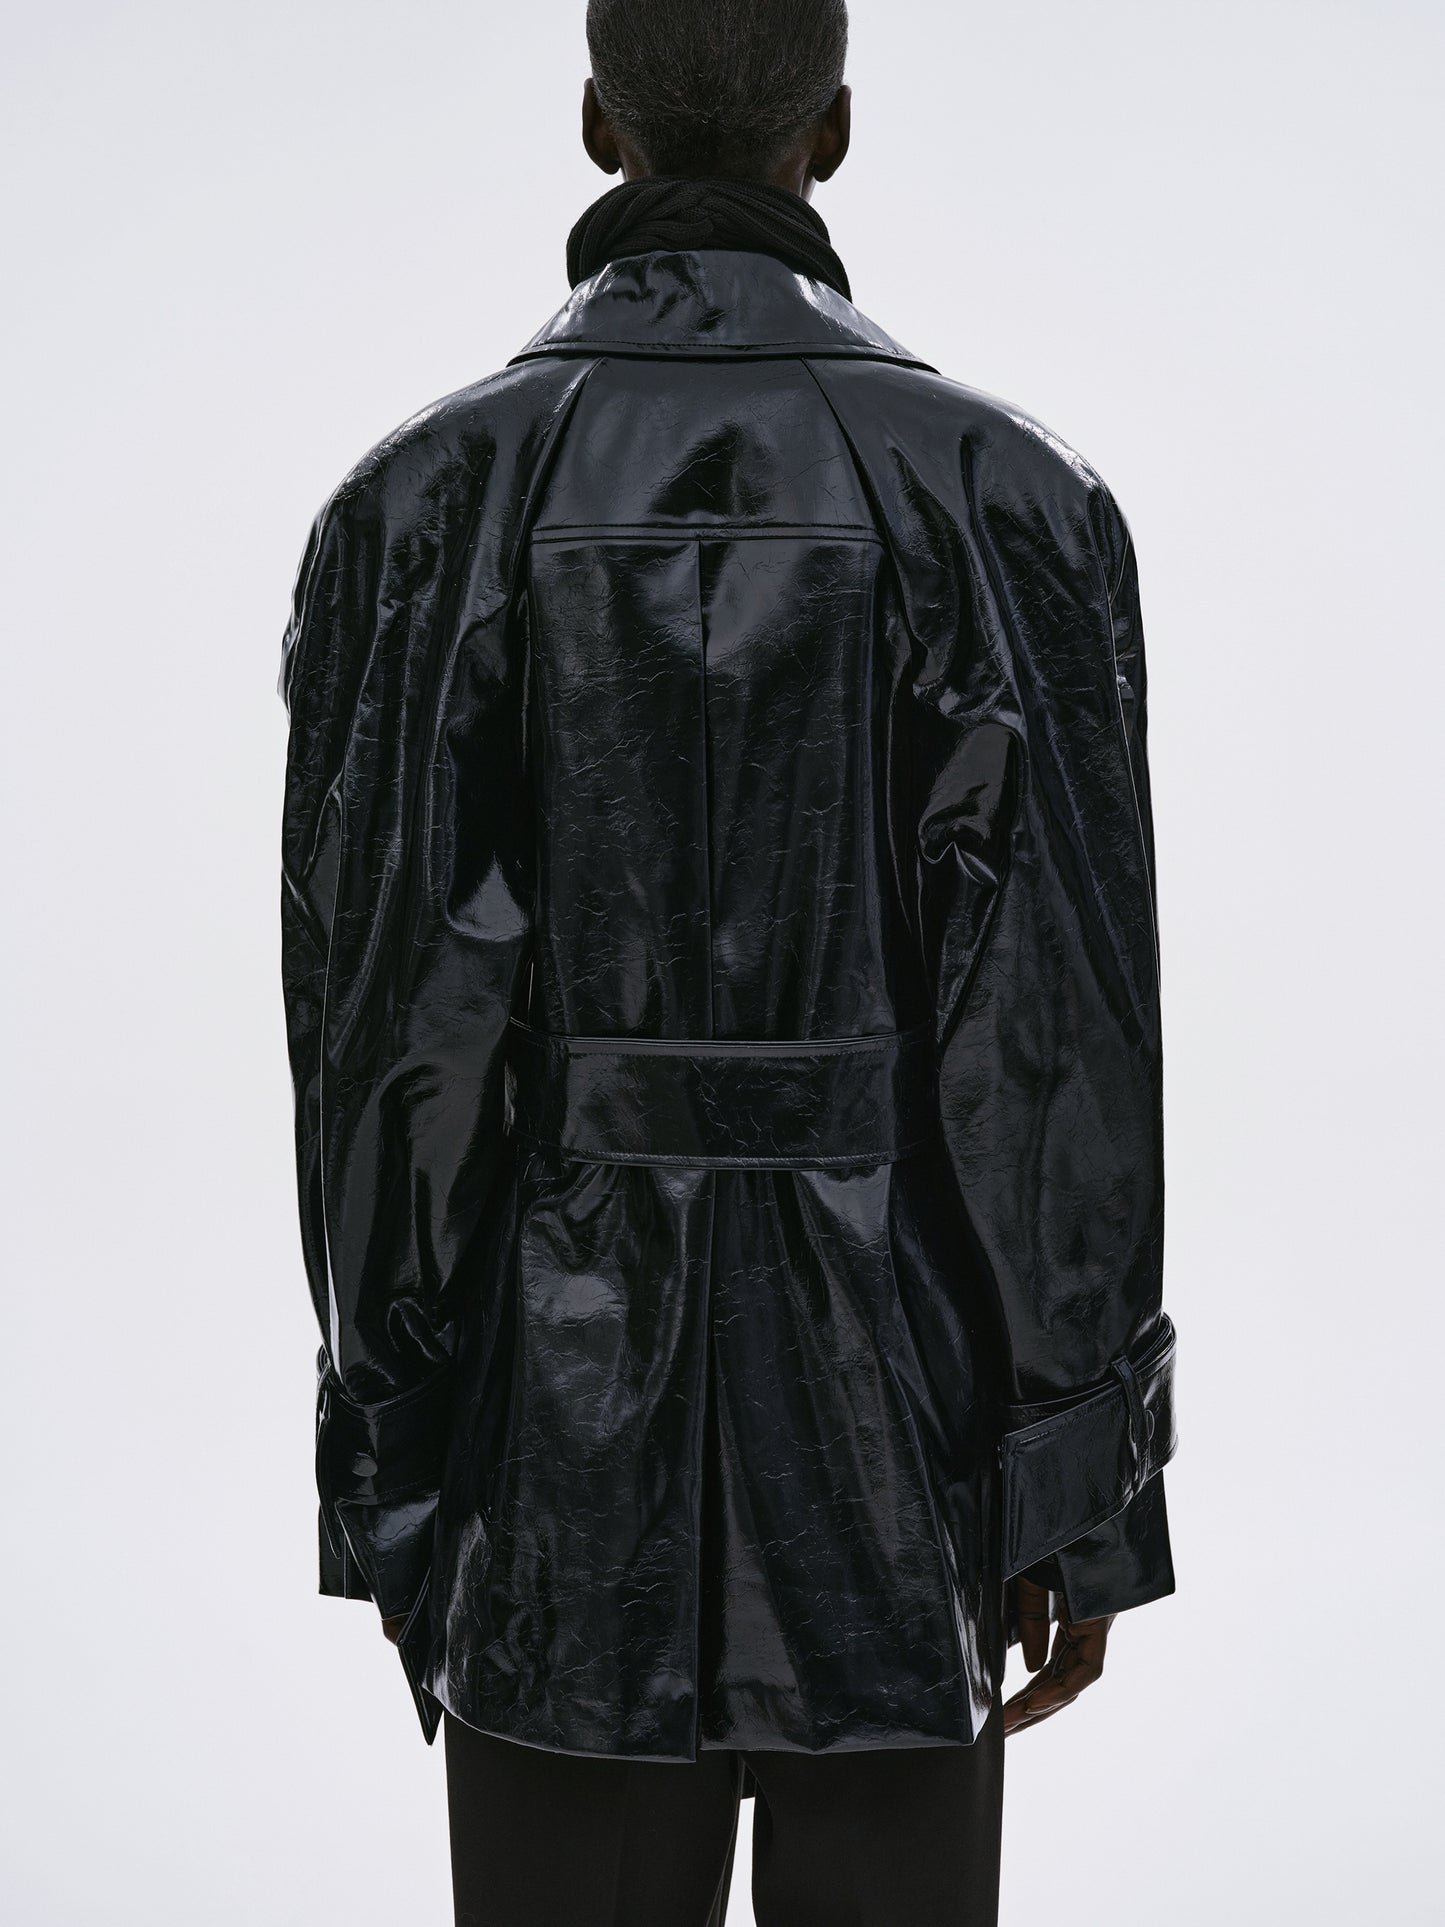 Patent Leather Trench Coat, Black